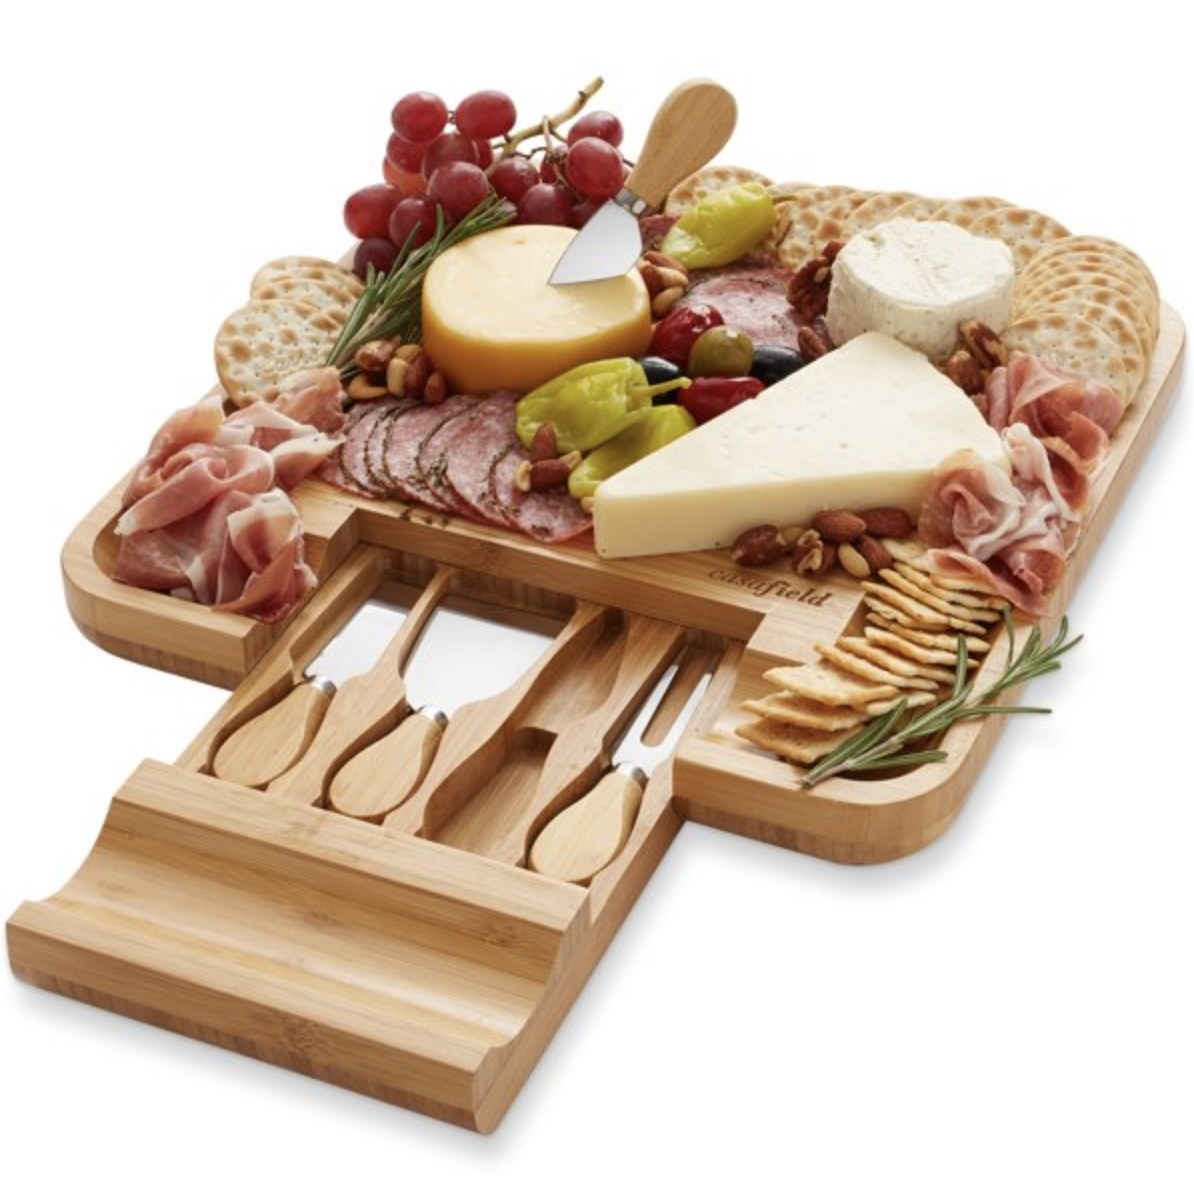 The bamboo serving tray filled with crackers, meats, and fruit